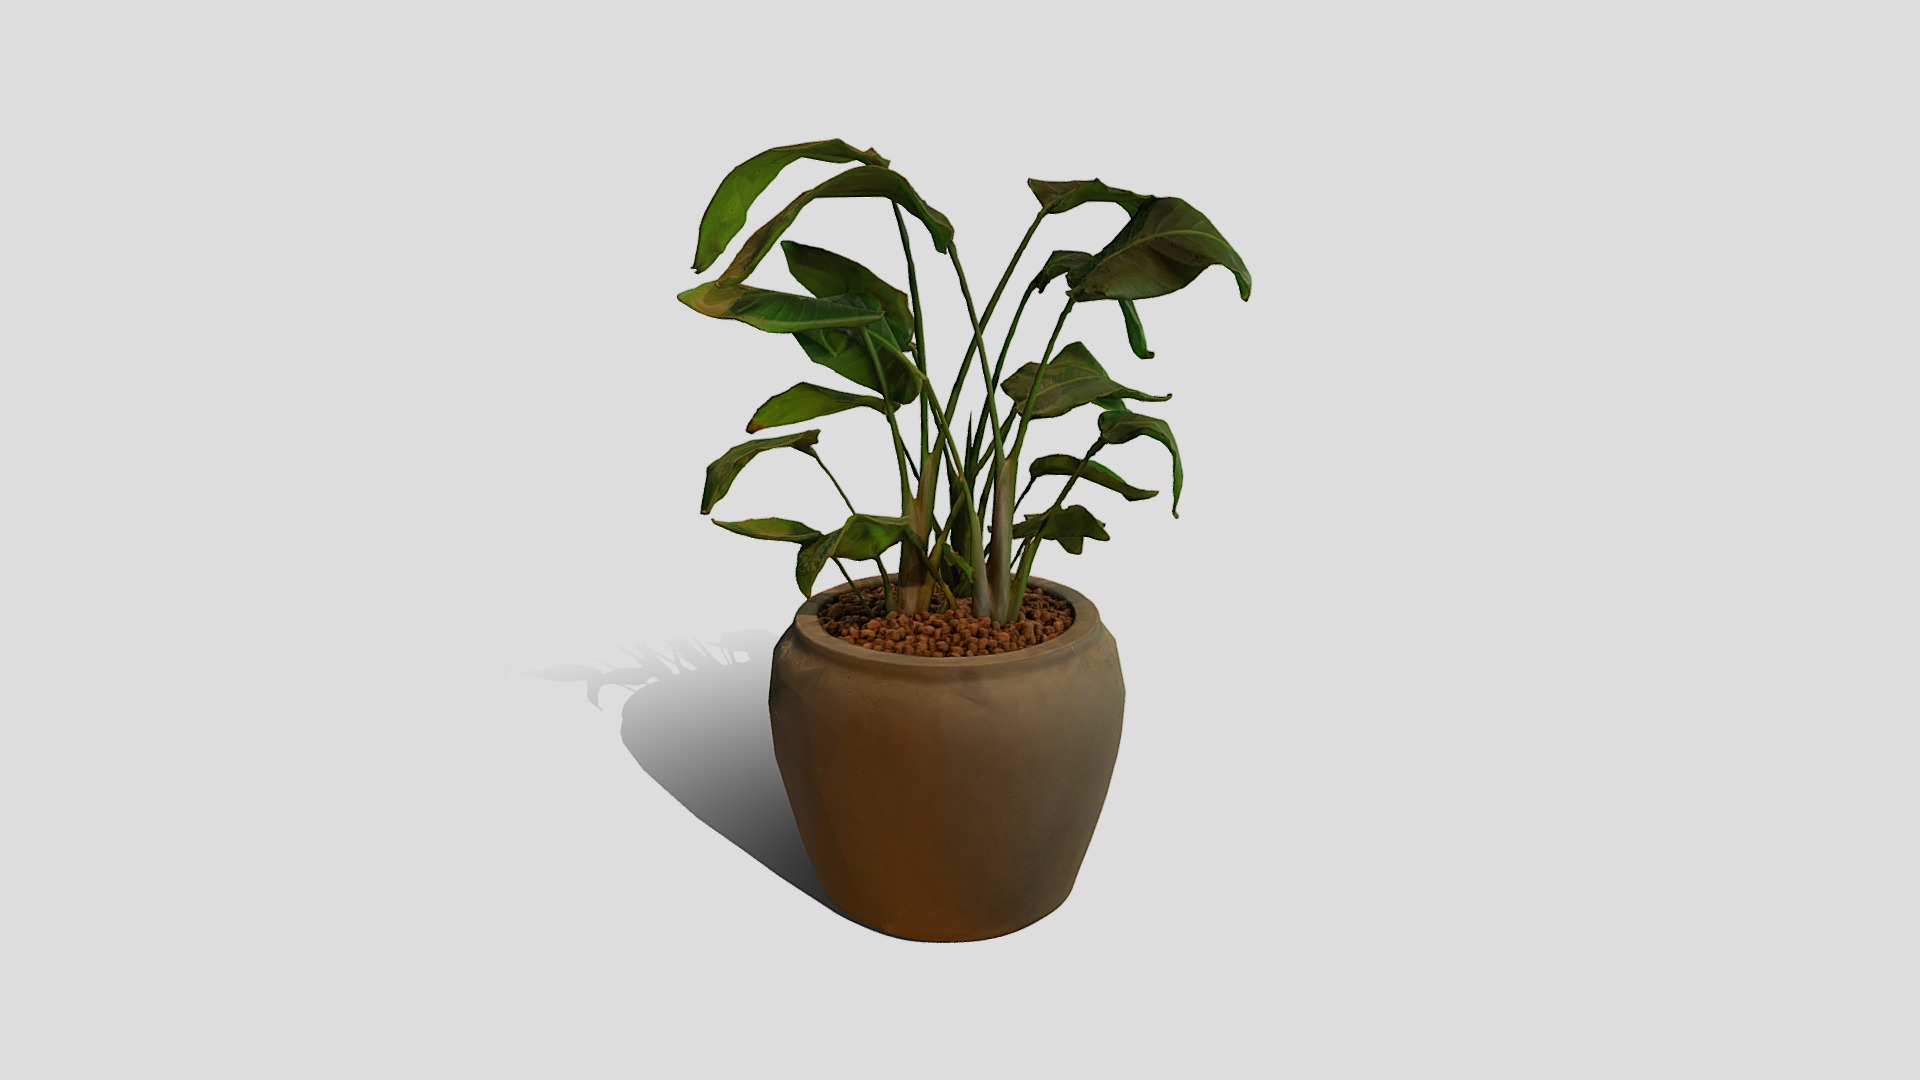 3D model Plant 1 - This is a 3D model of the Plant 1. The 3D model is about a potted plant with a green plant in it.